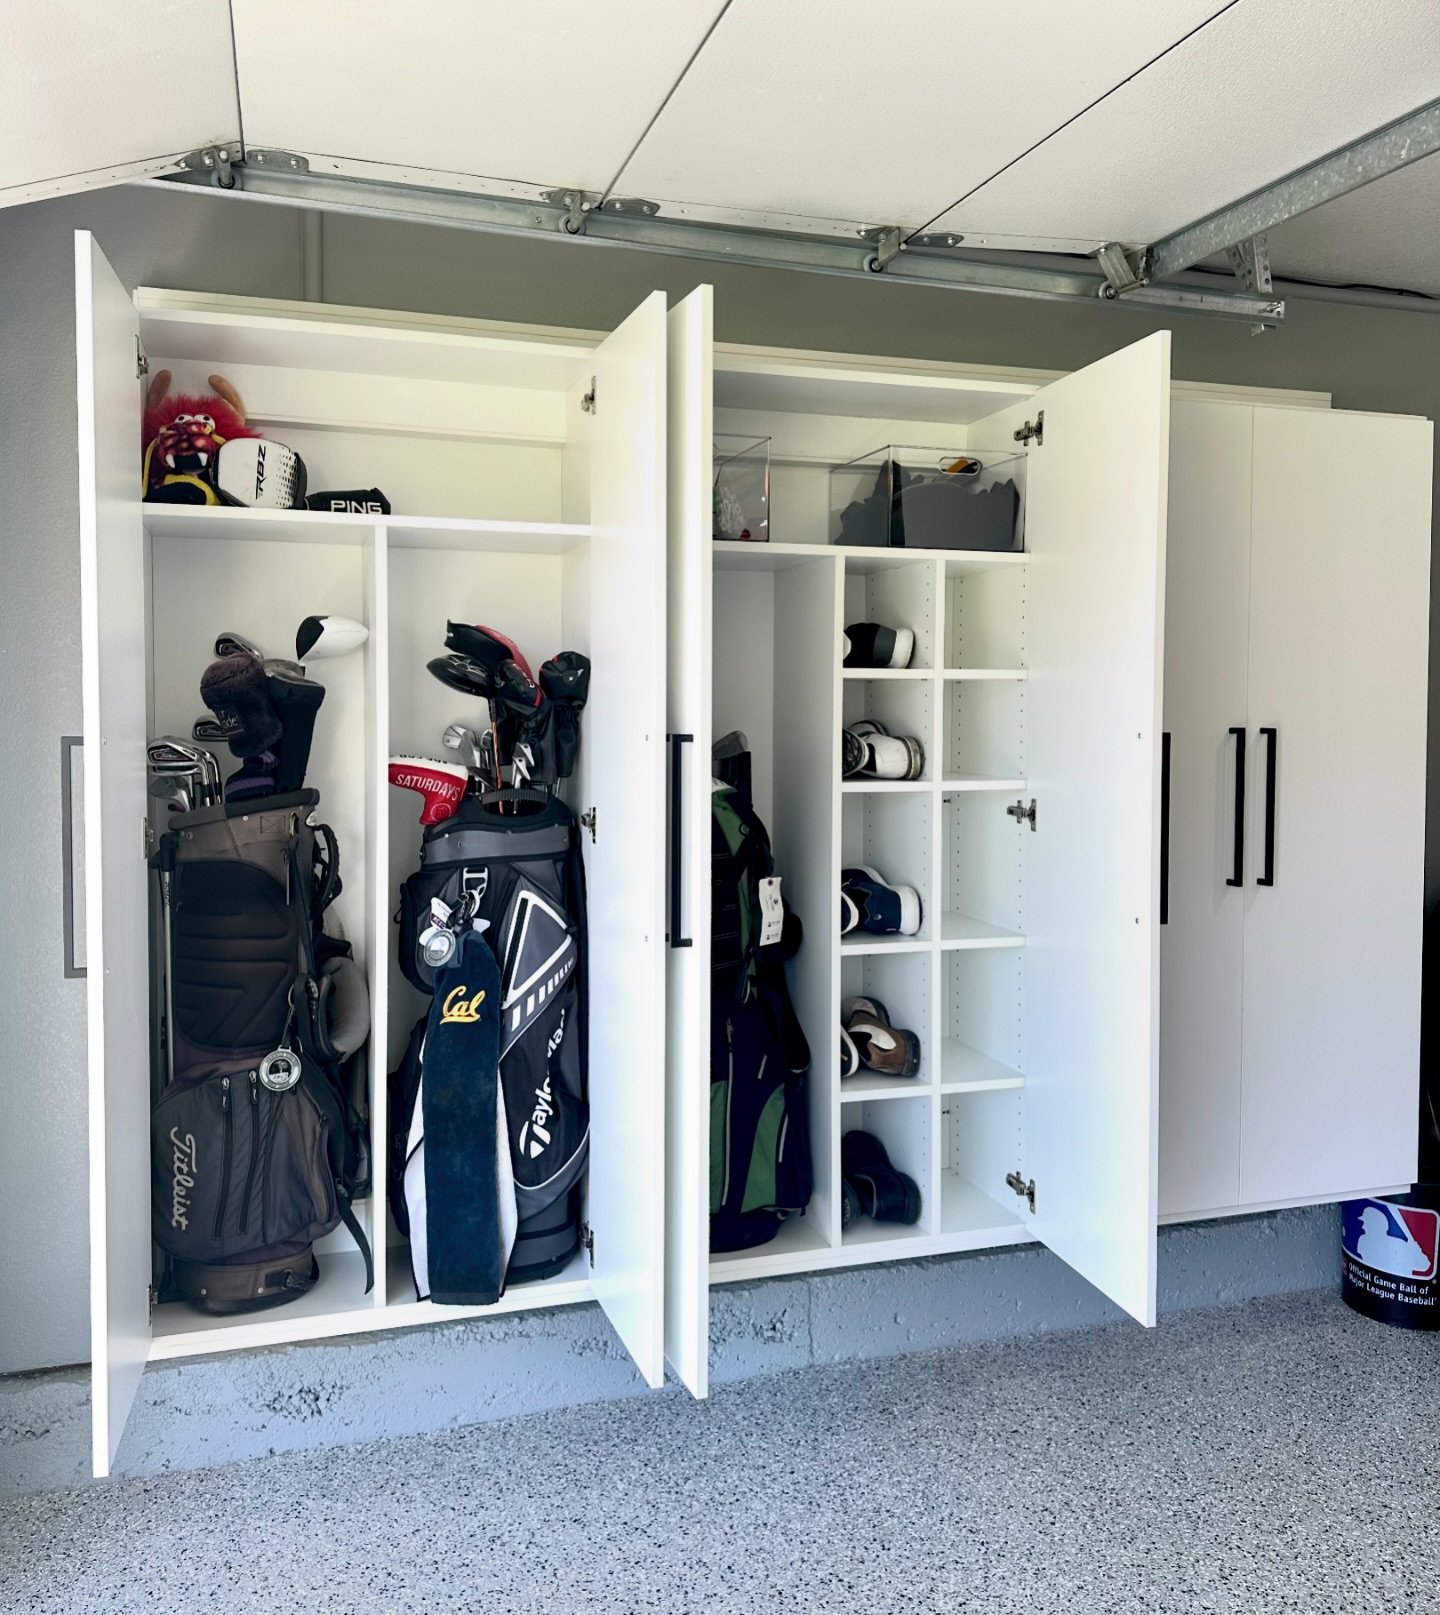 Garage ⛳️ Goals brought to you by @_alwaysorganized &amp; @closet_factory
Walls finished, cabinets installed, new bins, fresh epoxy floors, junk removal, donations, THATS HOW YOU DO IT 😍

______________________________
Gina LaRocca, CPO and Owner
𝘈